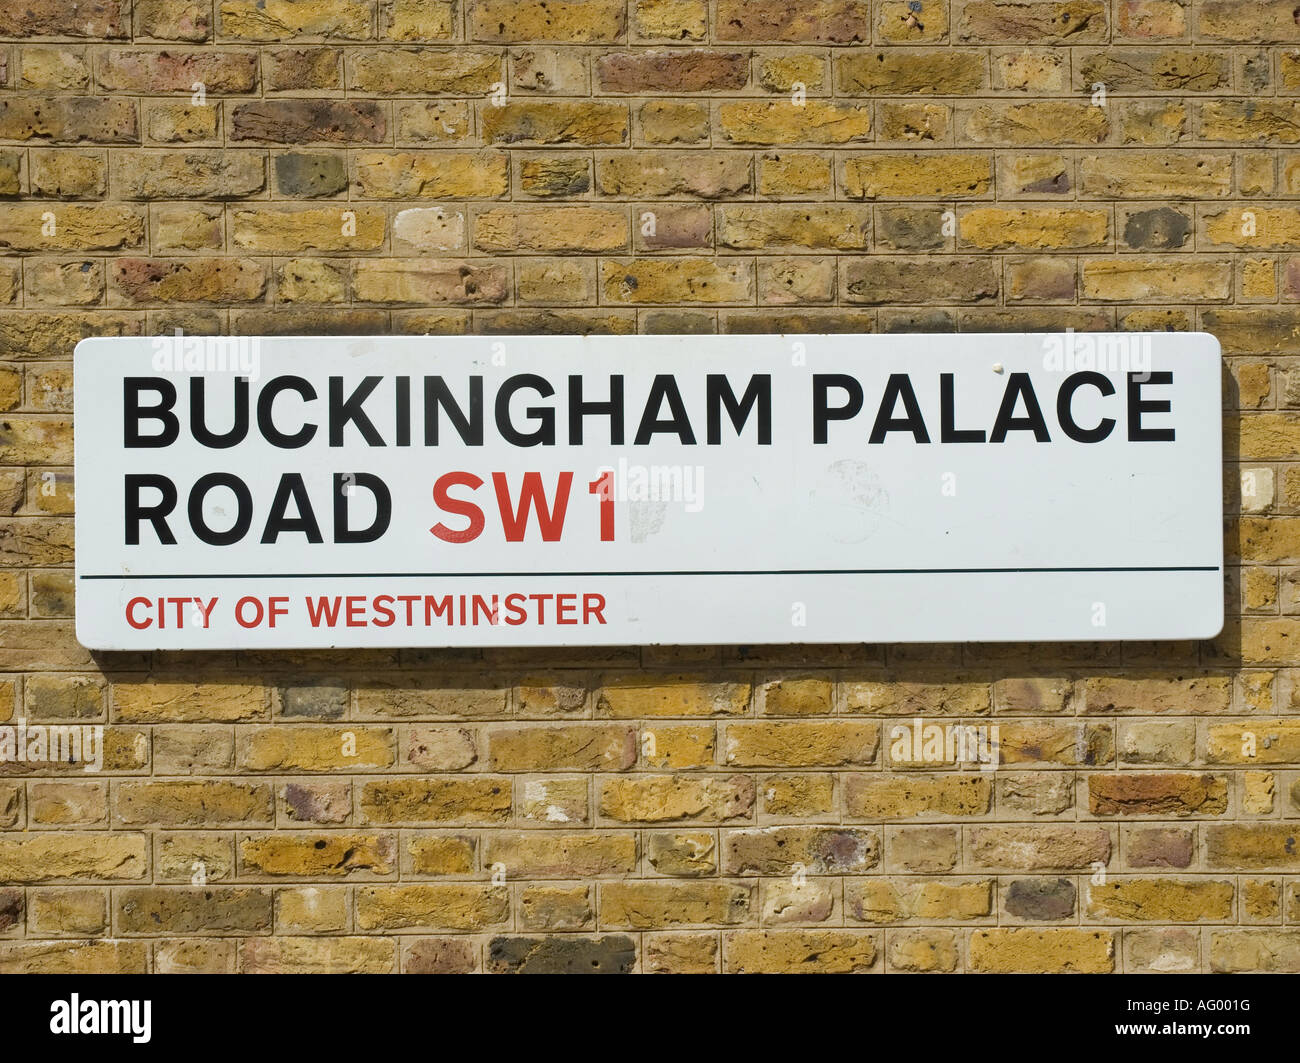 Buckingham Palace Road sign in London Stock Photo